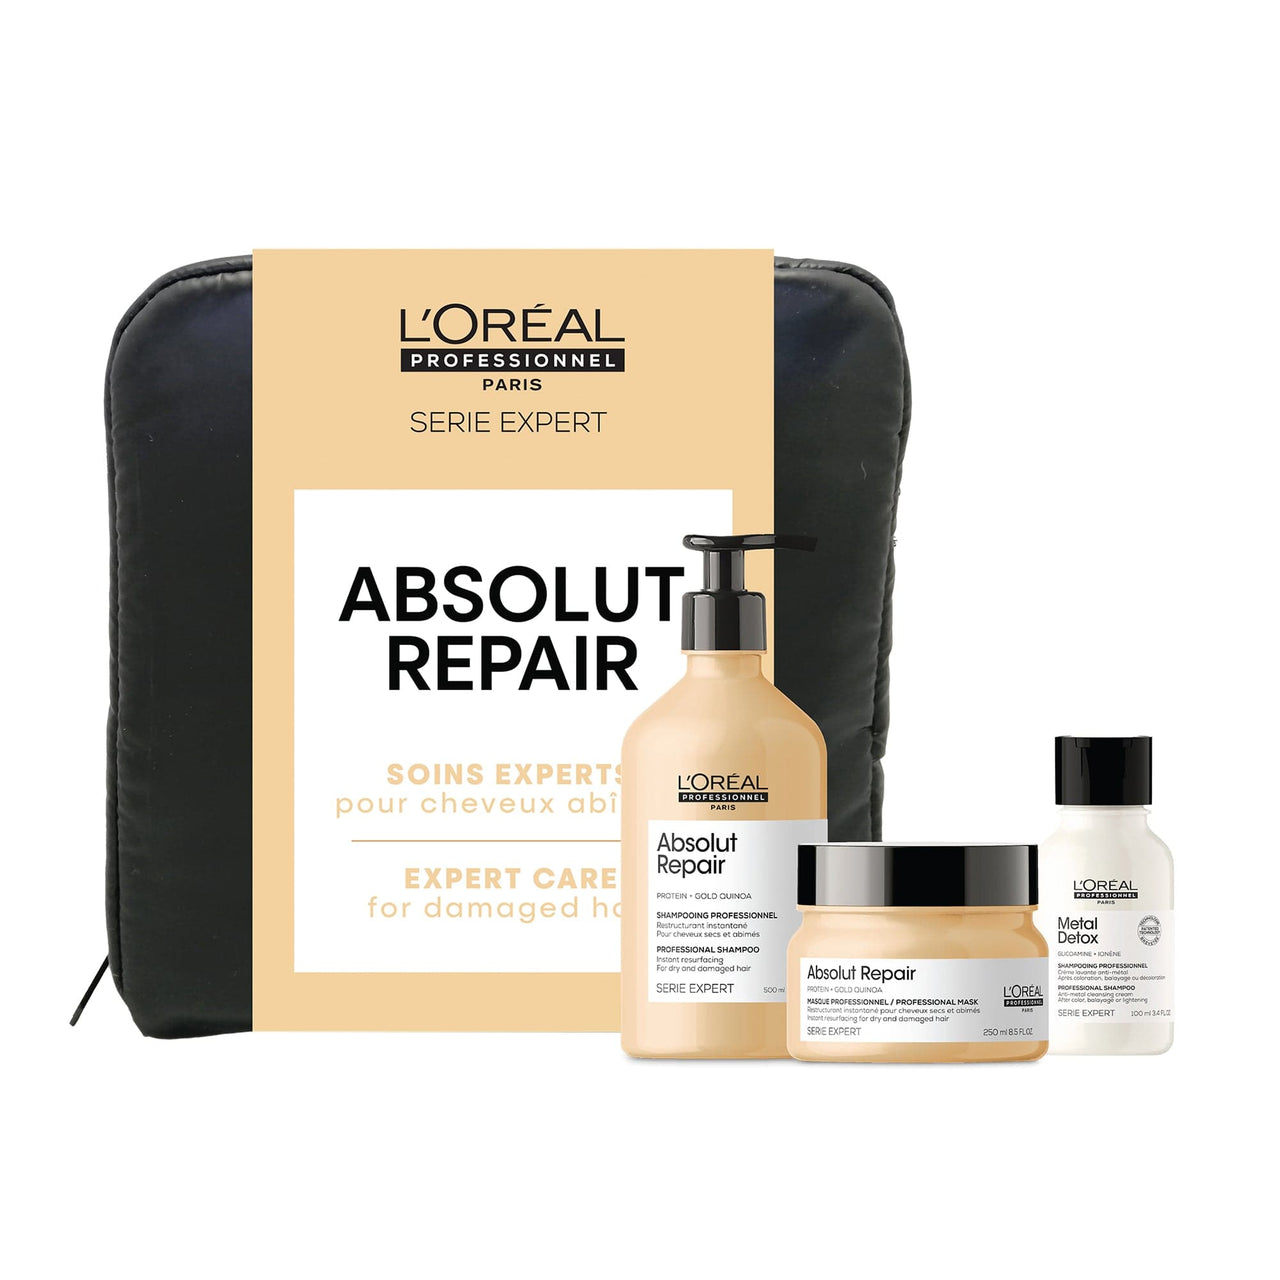 L'OREAL PROFESSIONNEL_Absolut Repair Holiday Kit_Cosmetic World